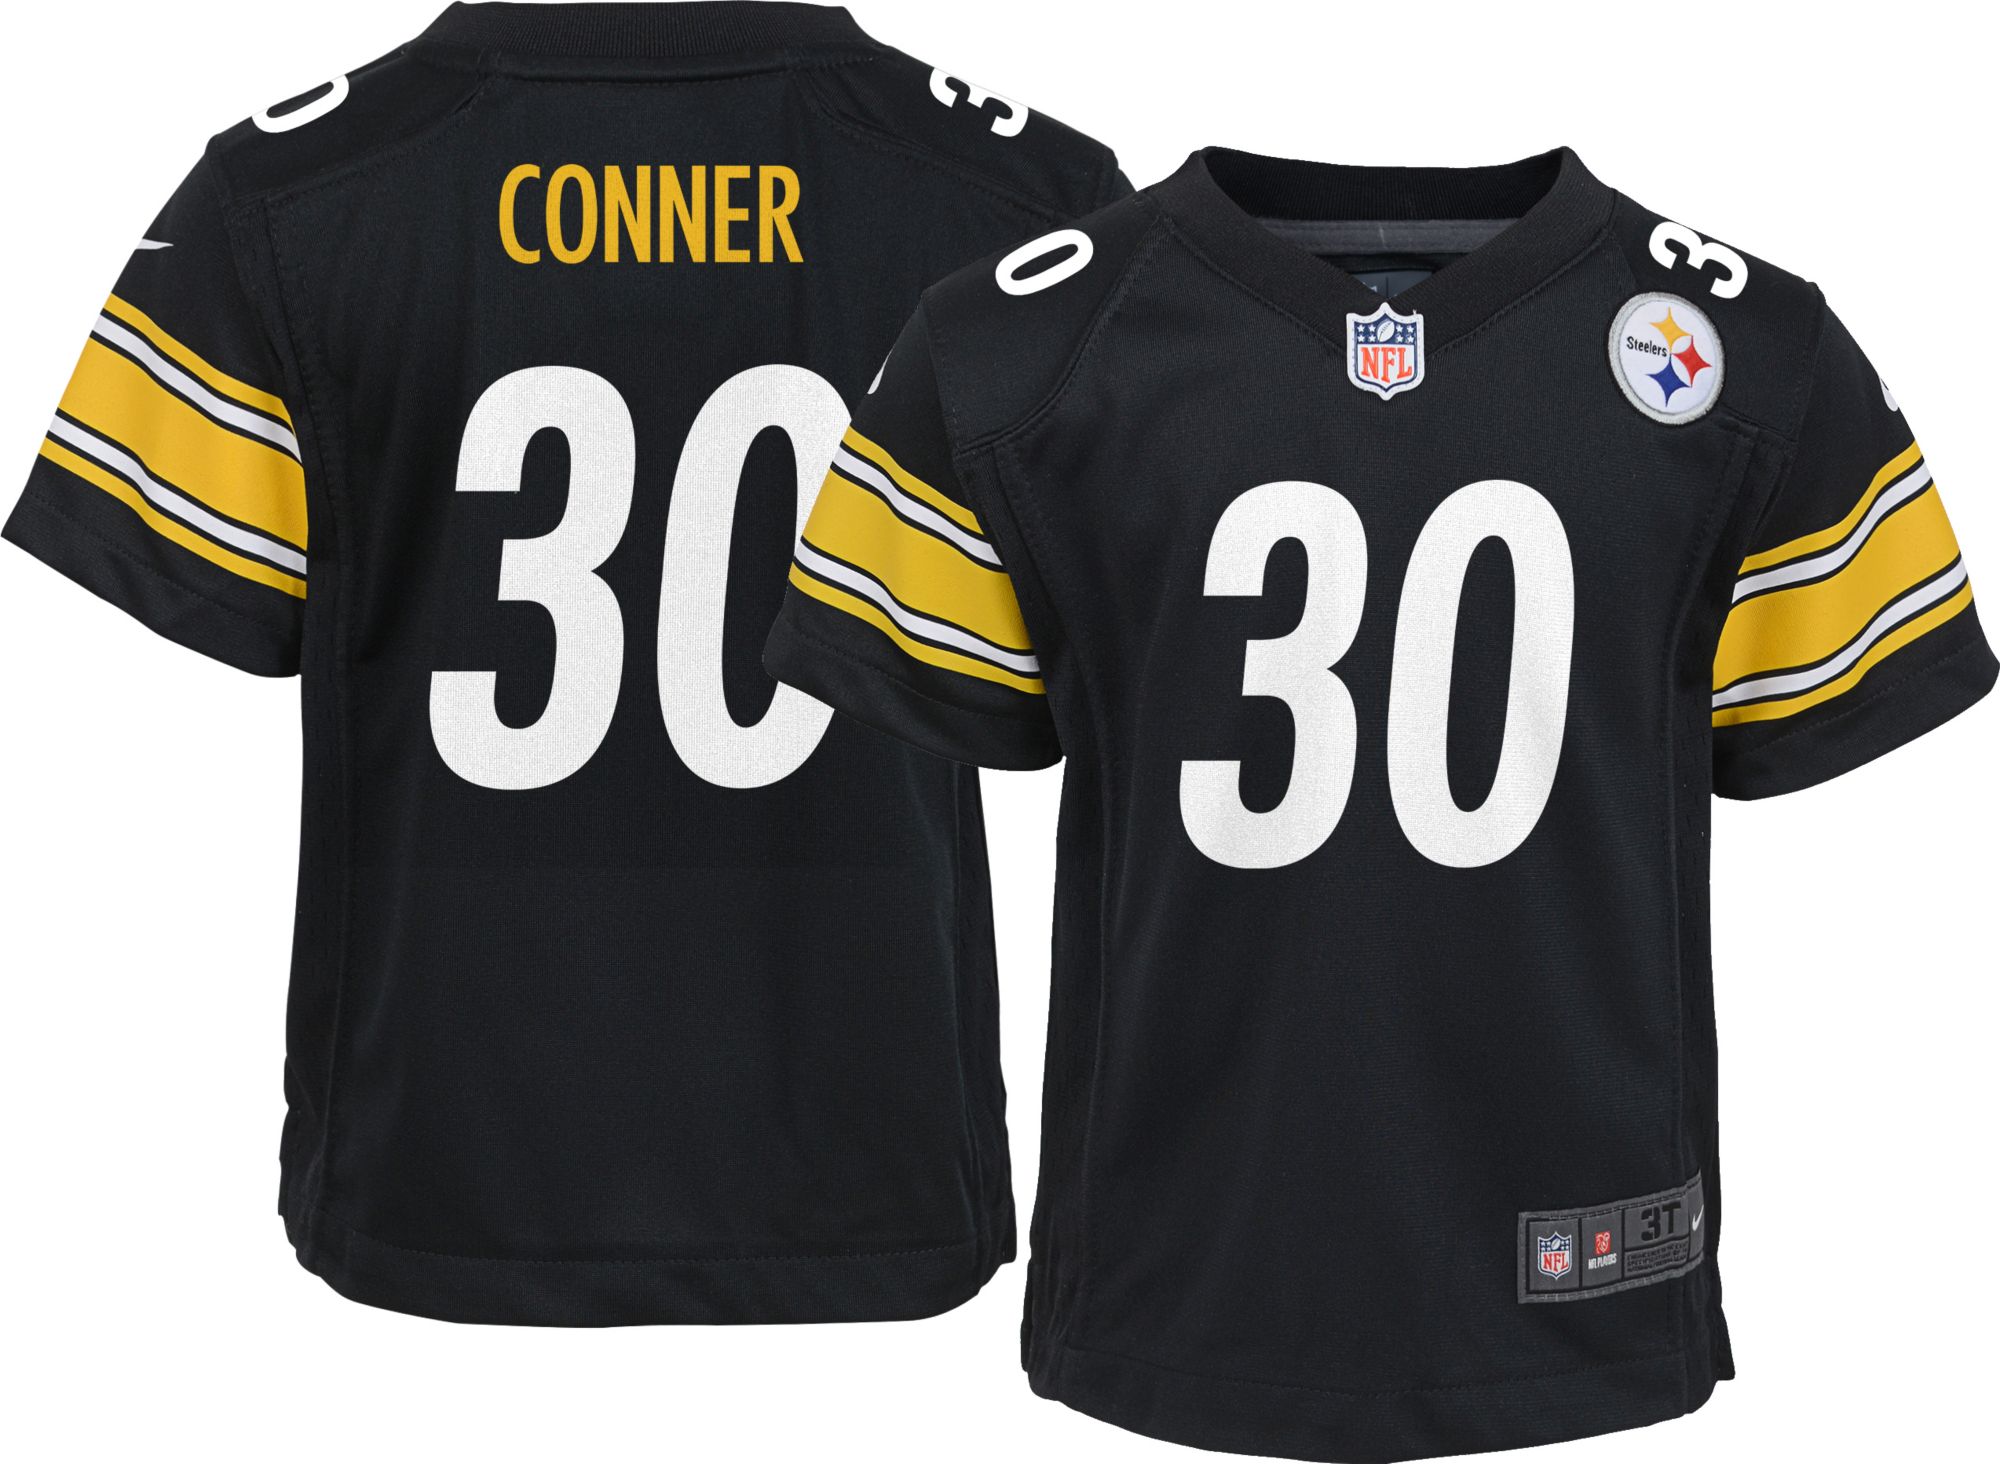 Pittsburgh Steelers James Conner #30 